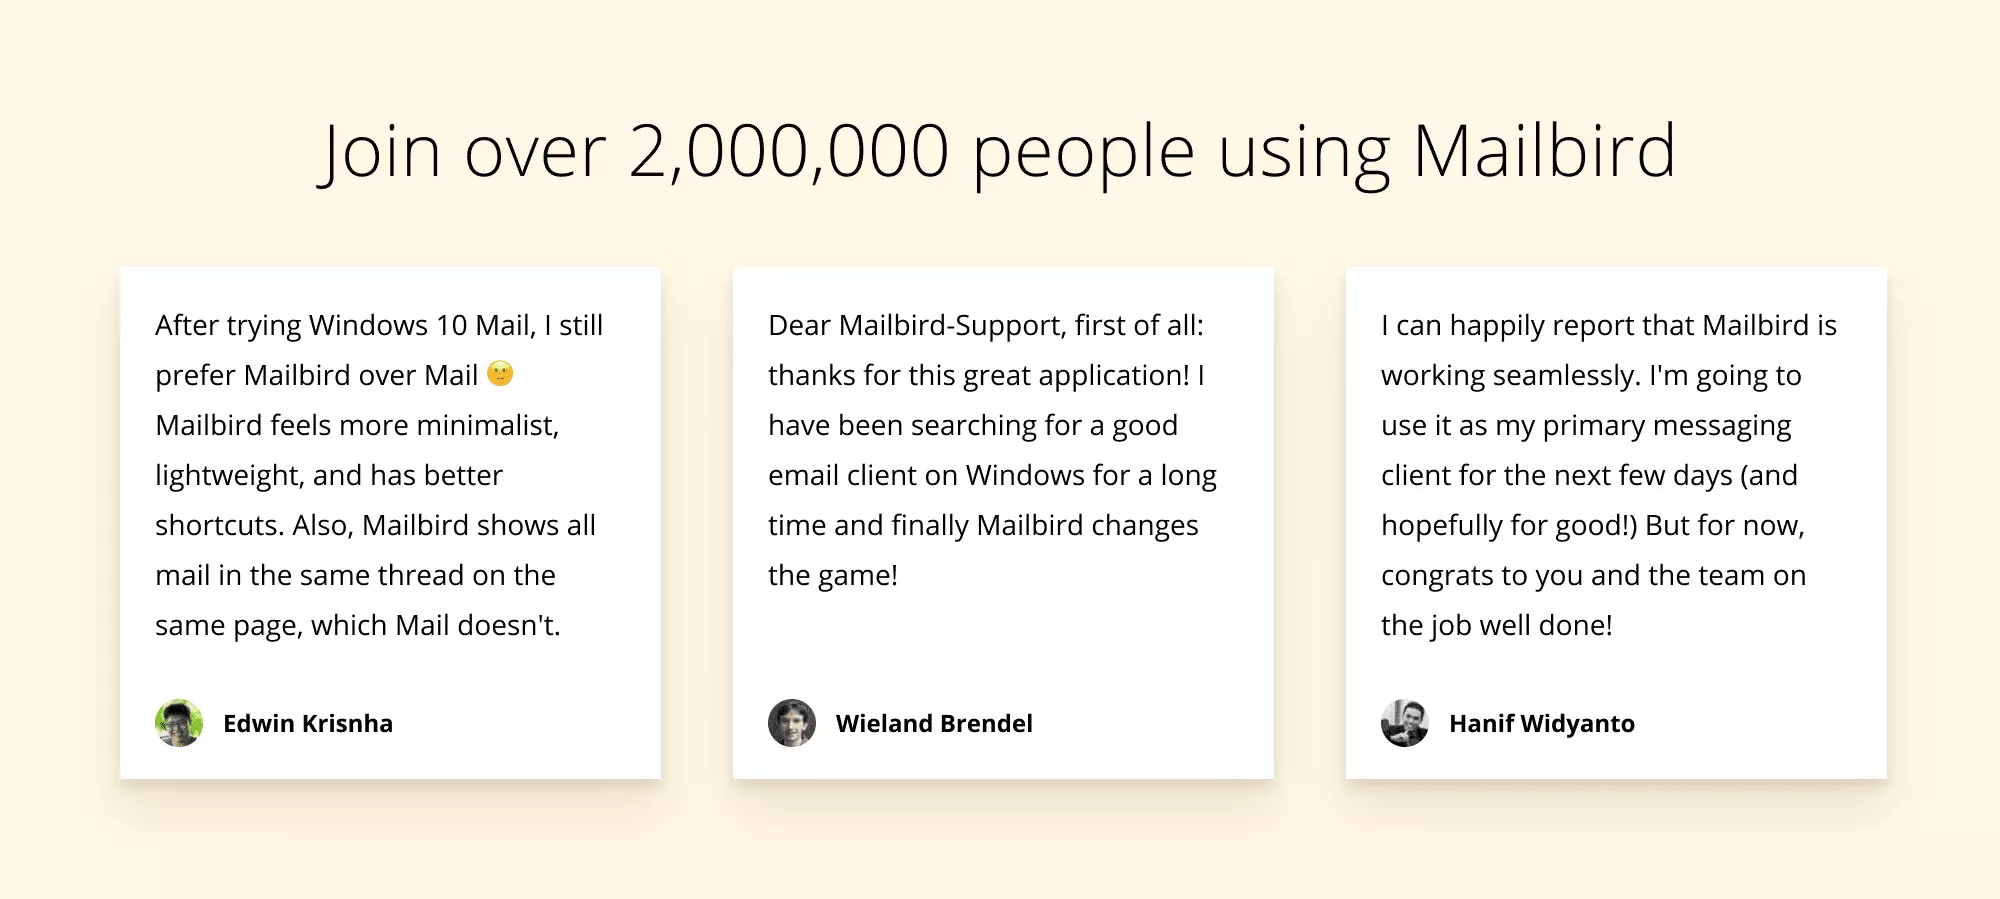 Who is Mailbird made for